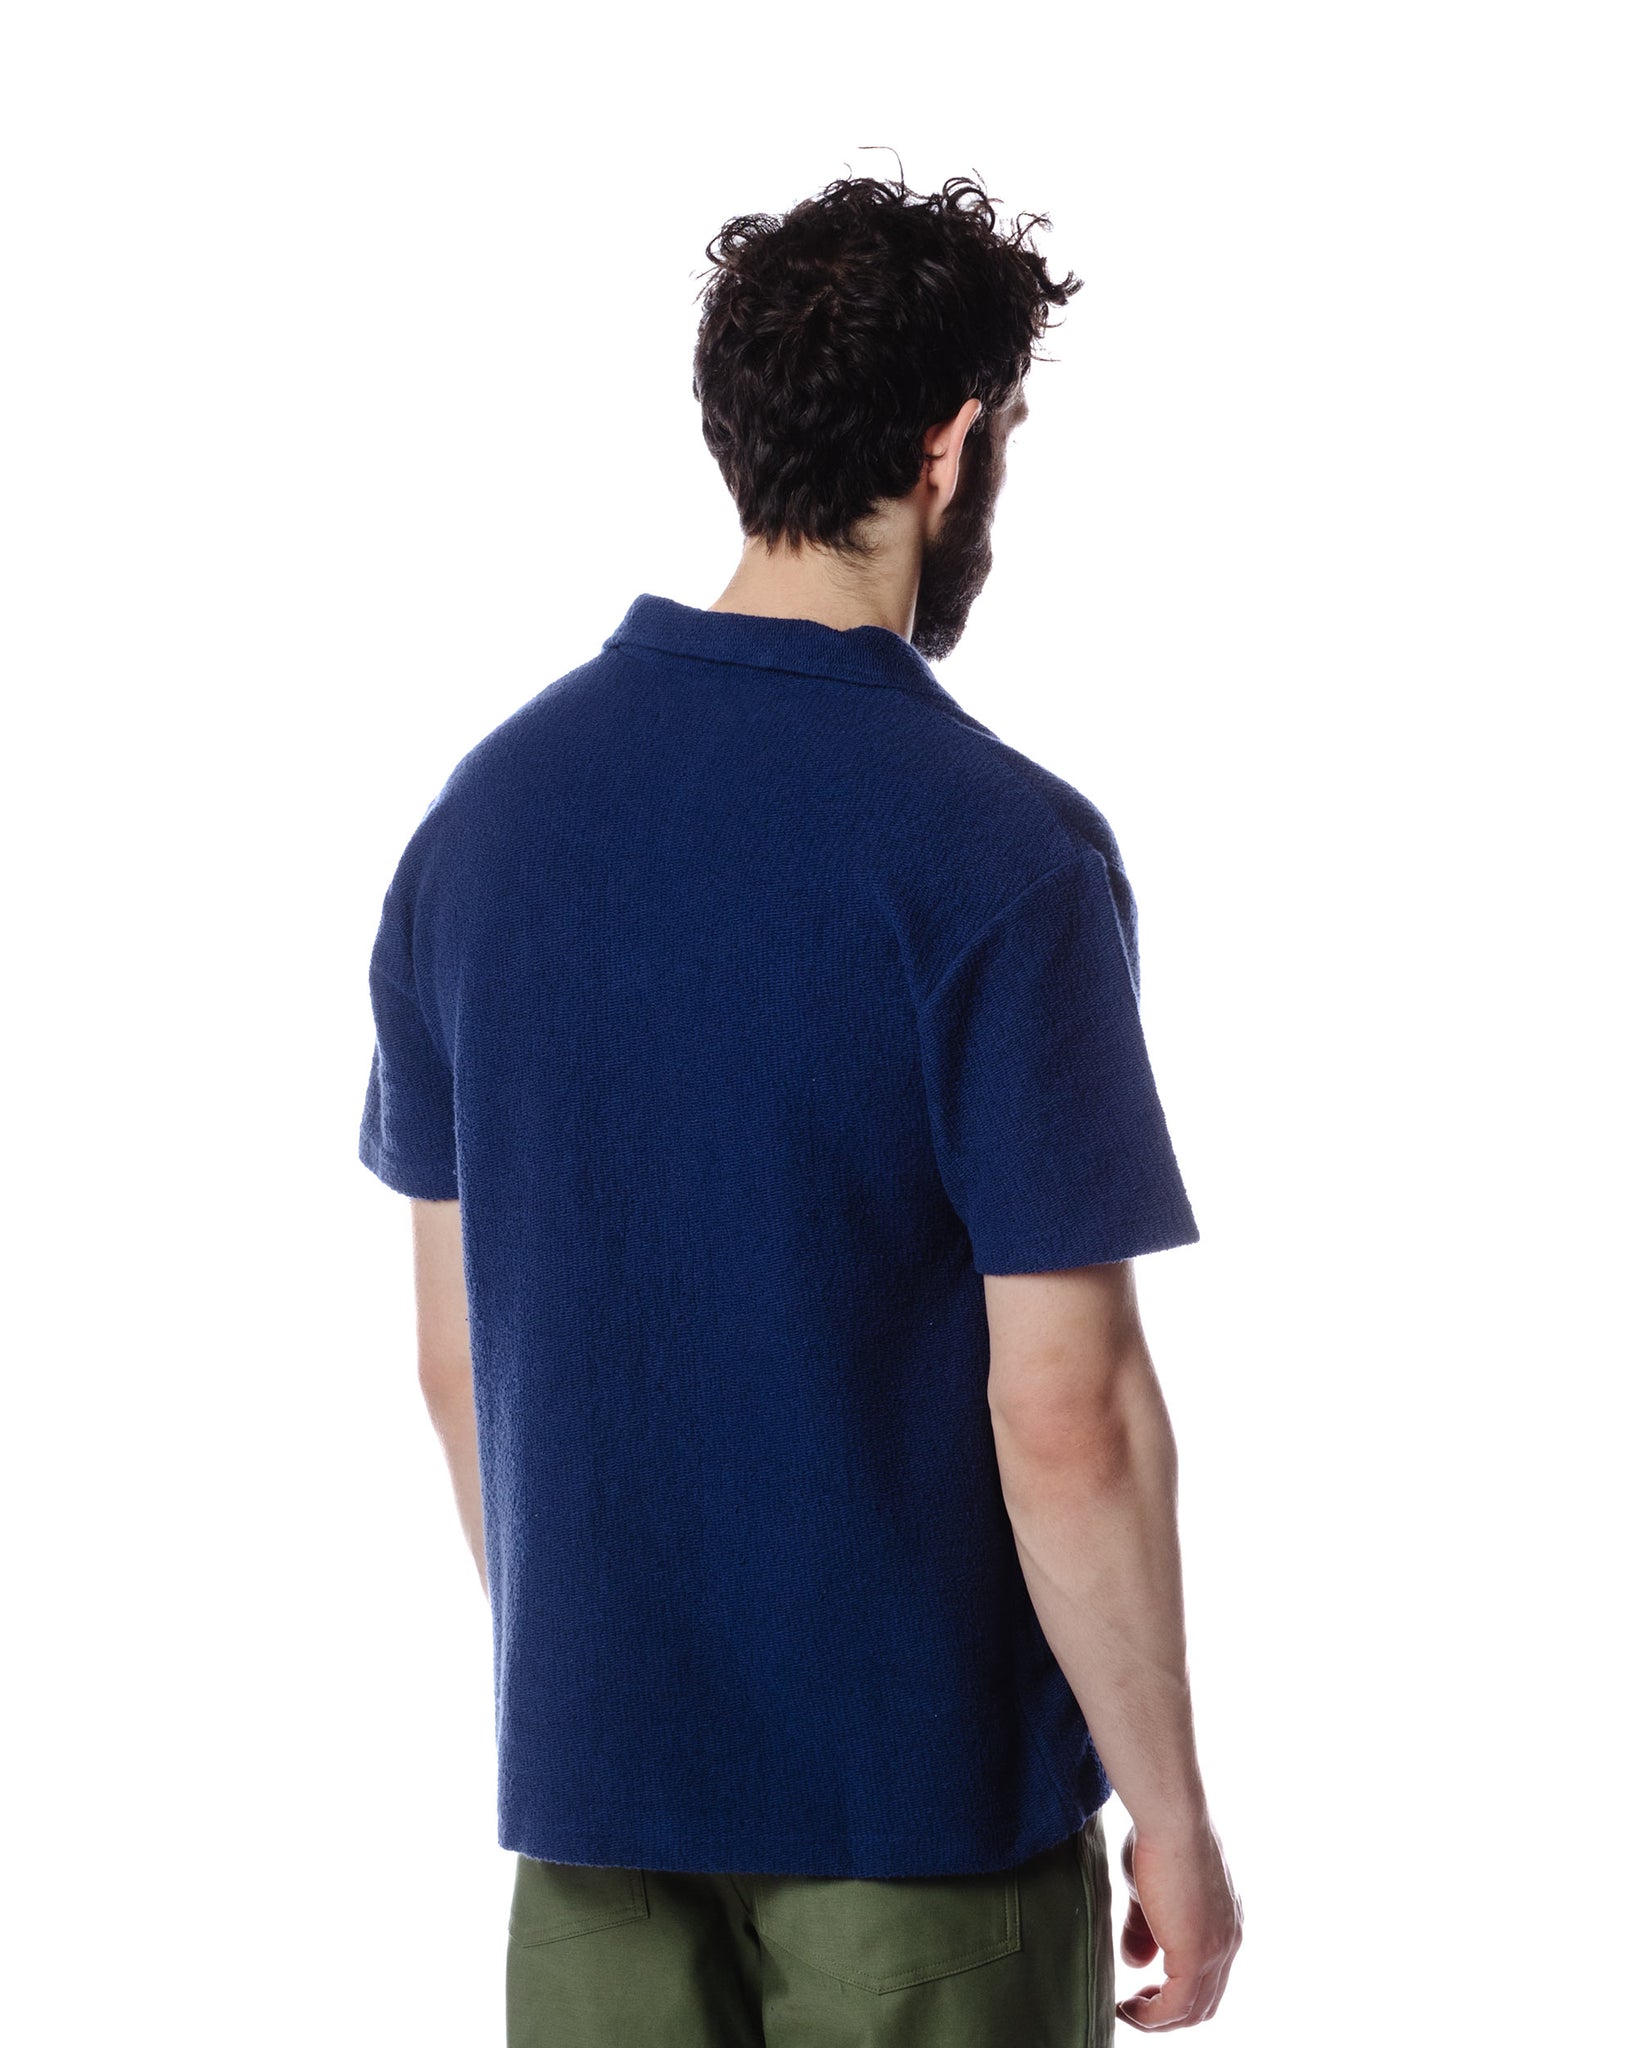 The Real McCoy's MC23017 Cotton Pile Skipper Navy Back